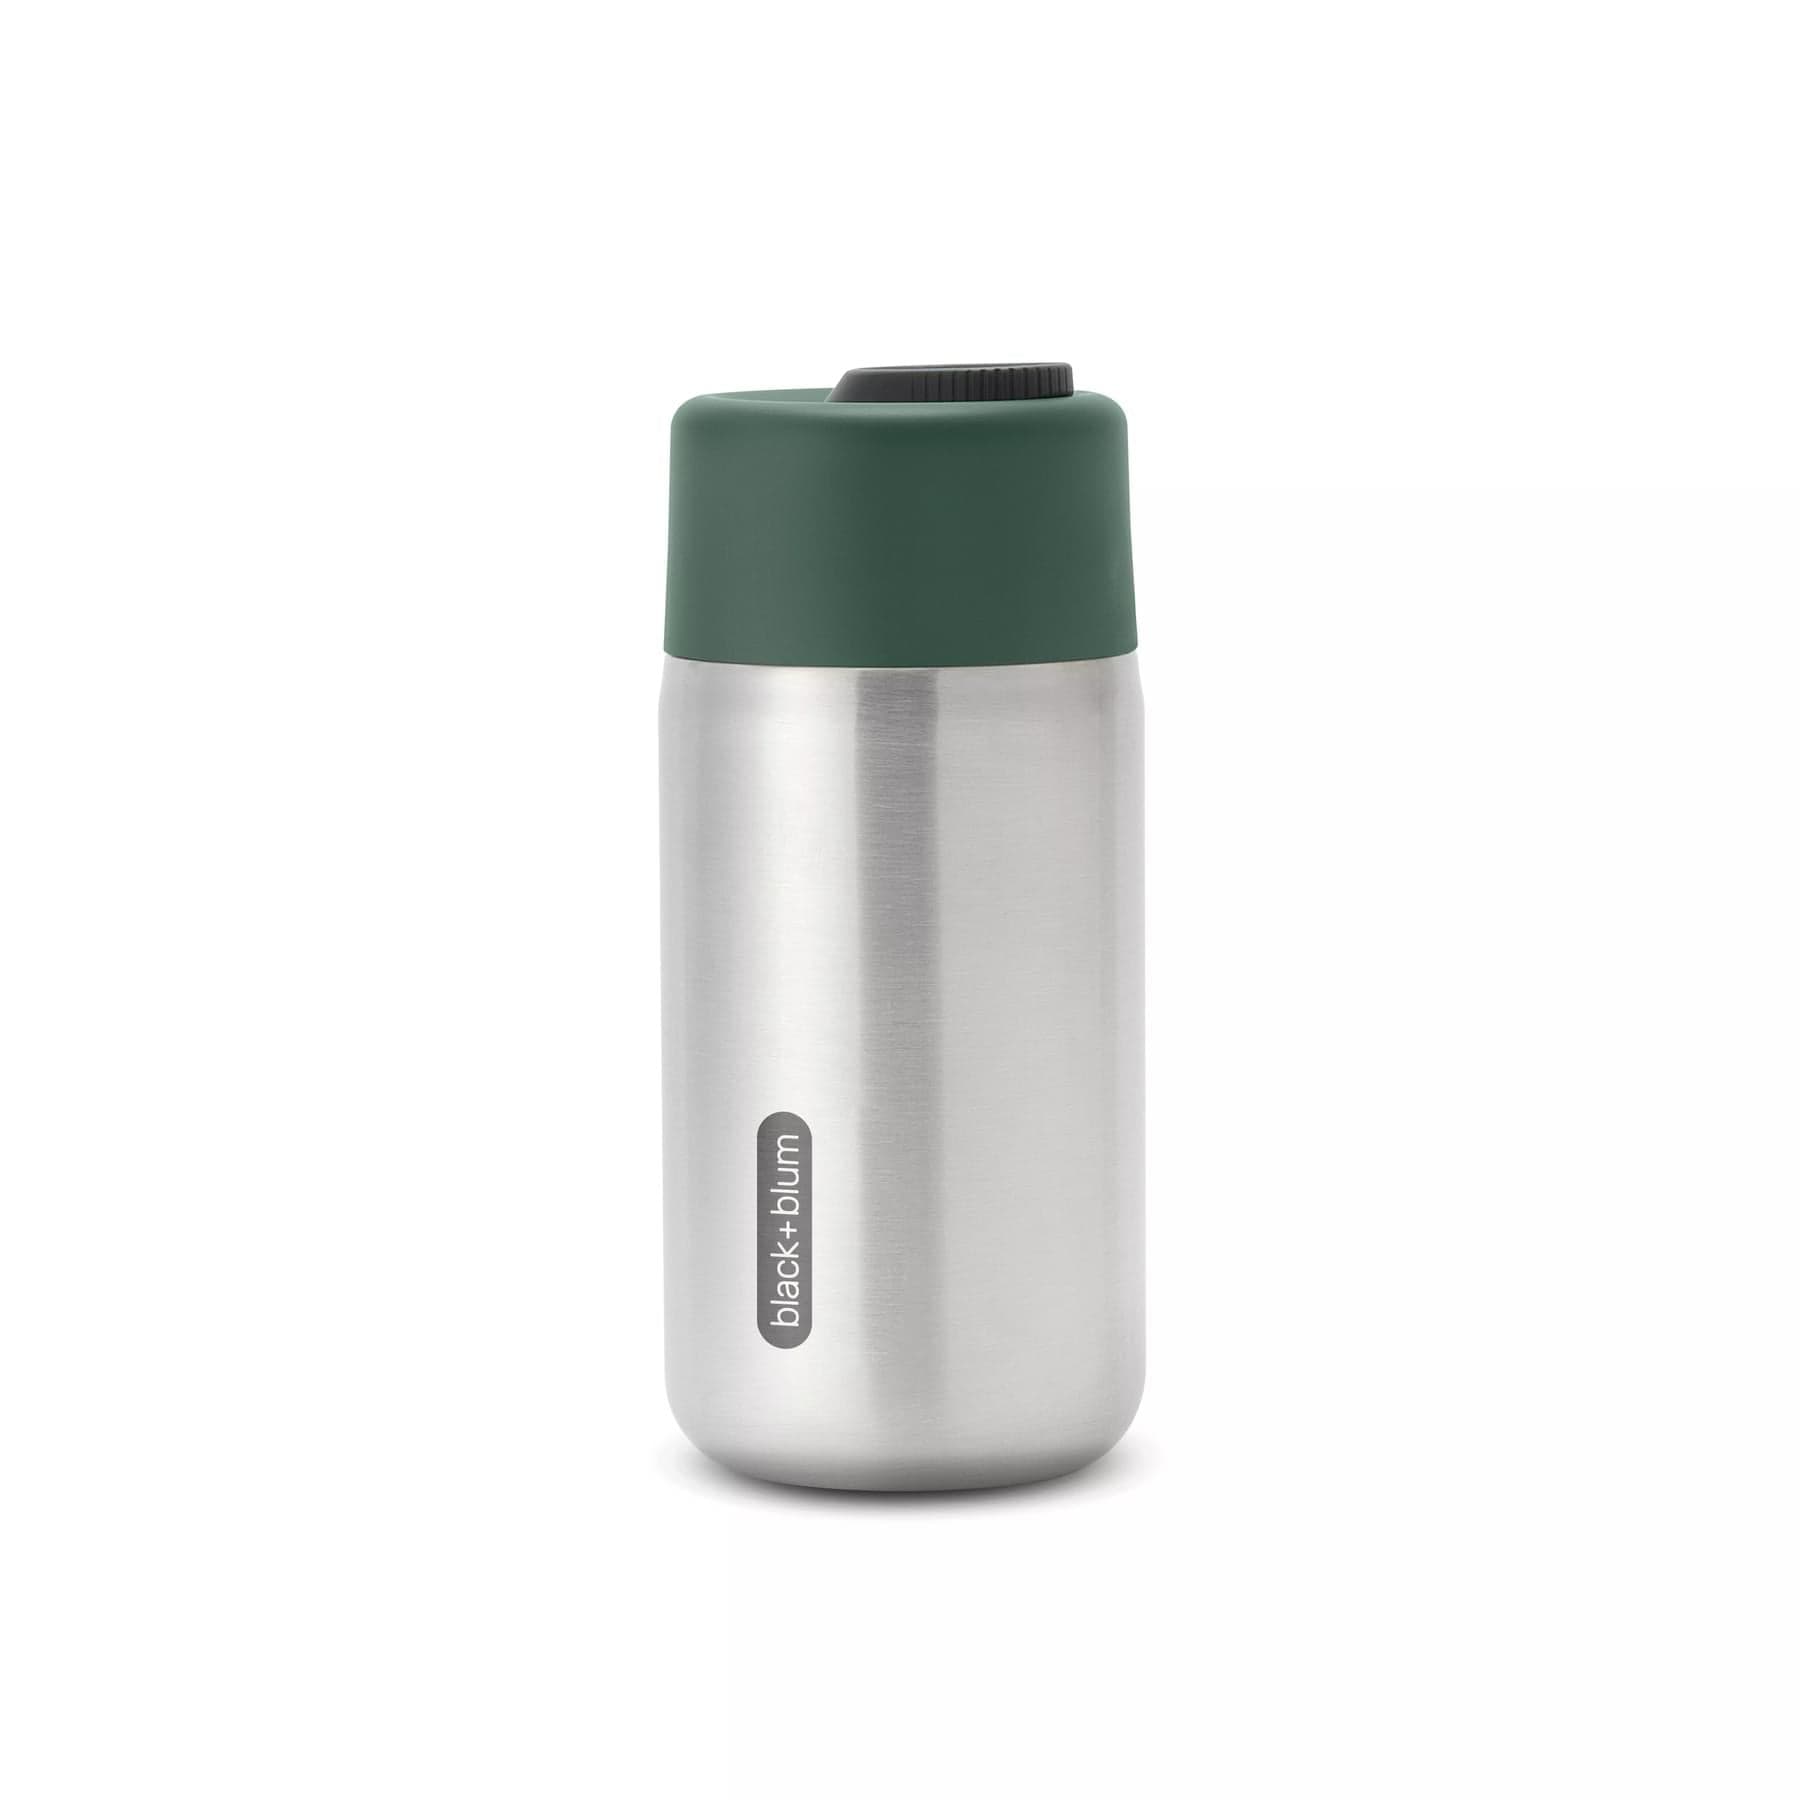 Stainless steel insulated water bottle with green lid on white background